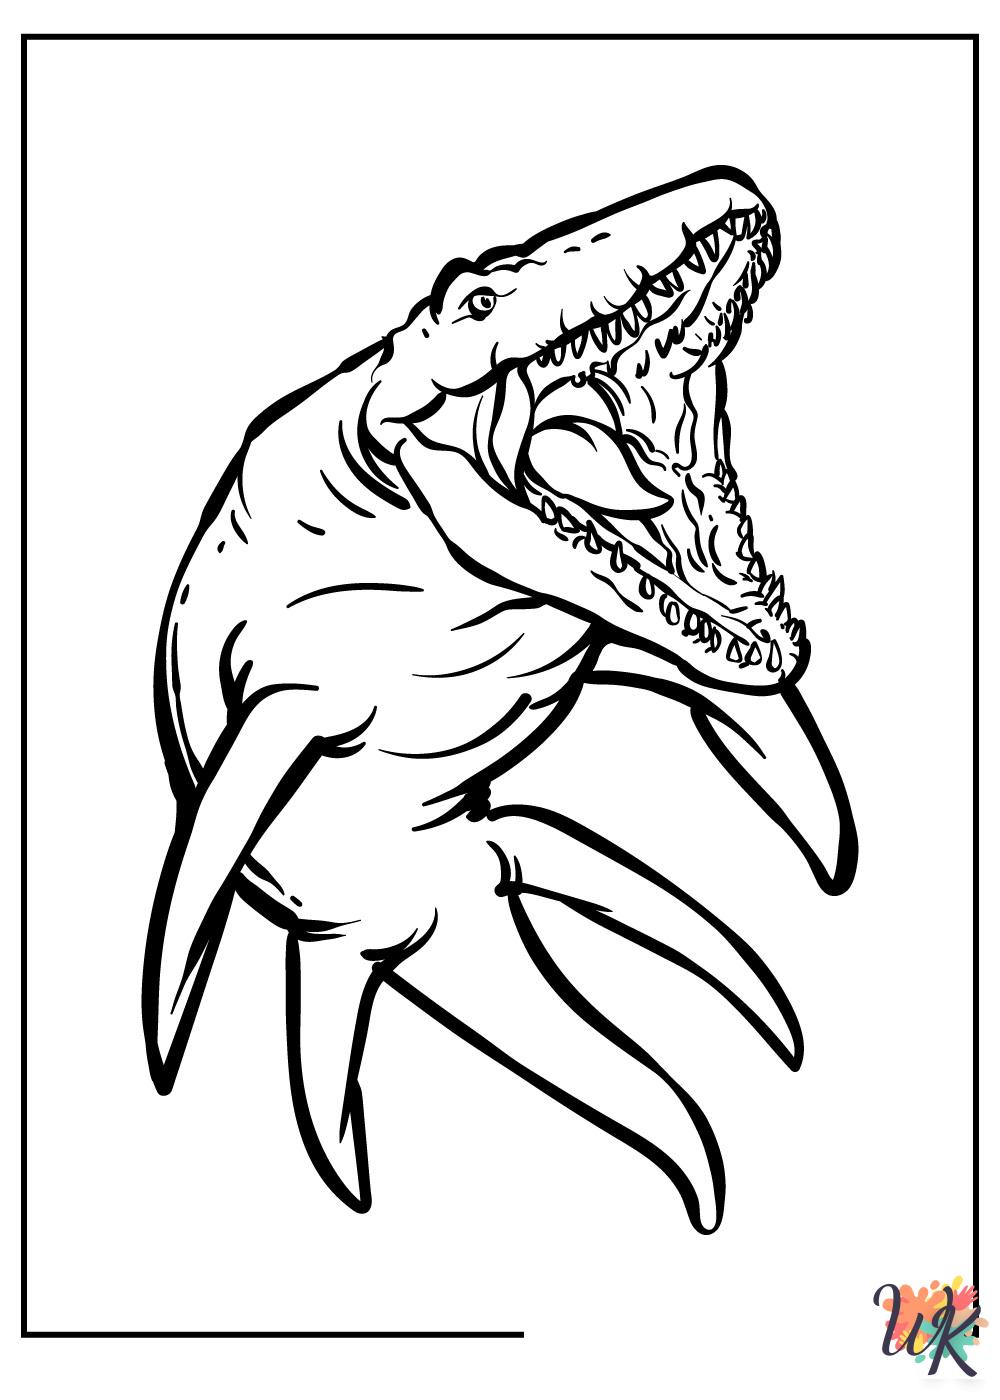 Jurassic Park coloring pages grinch